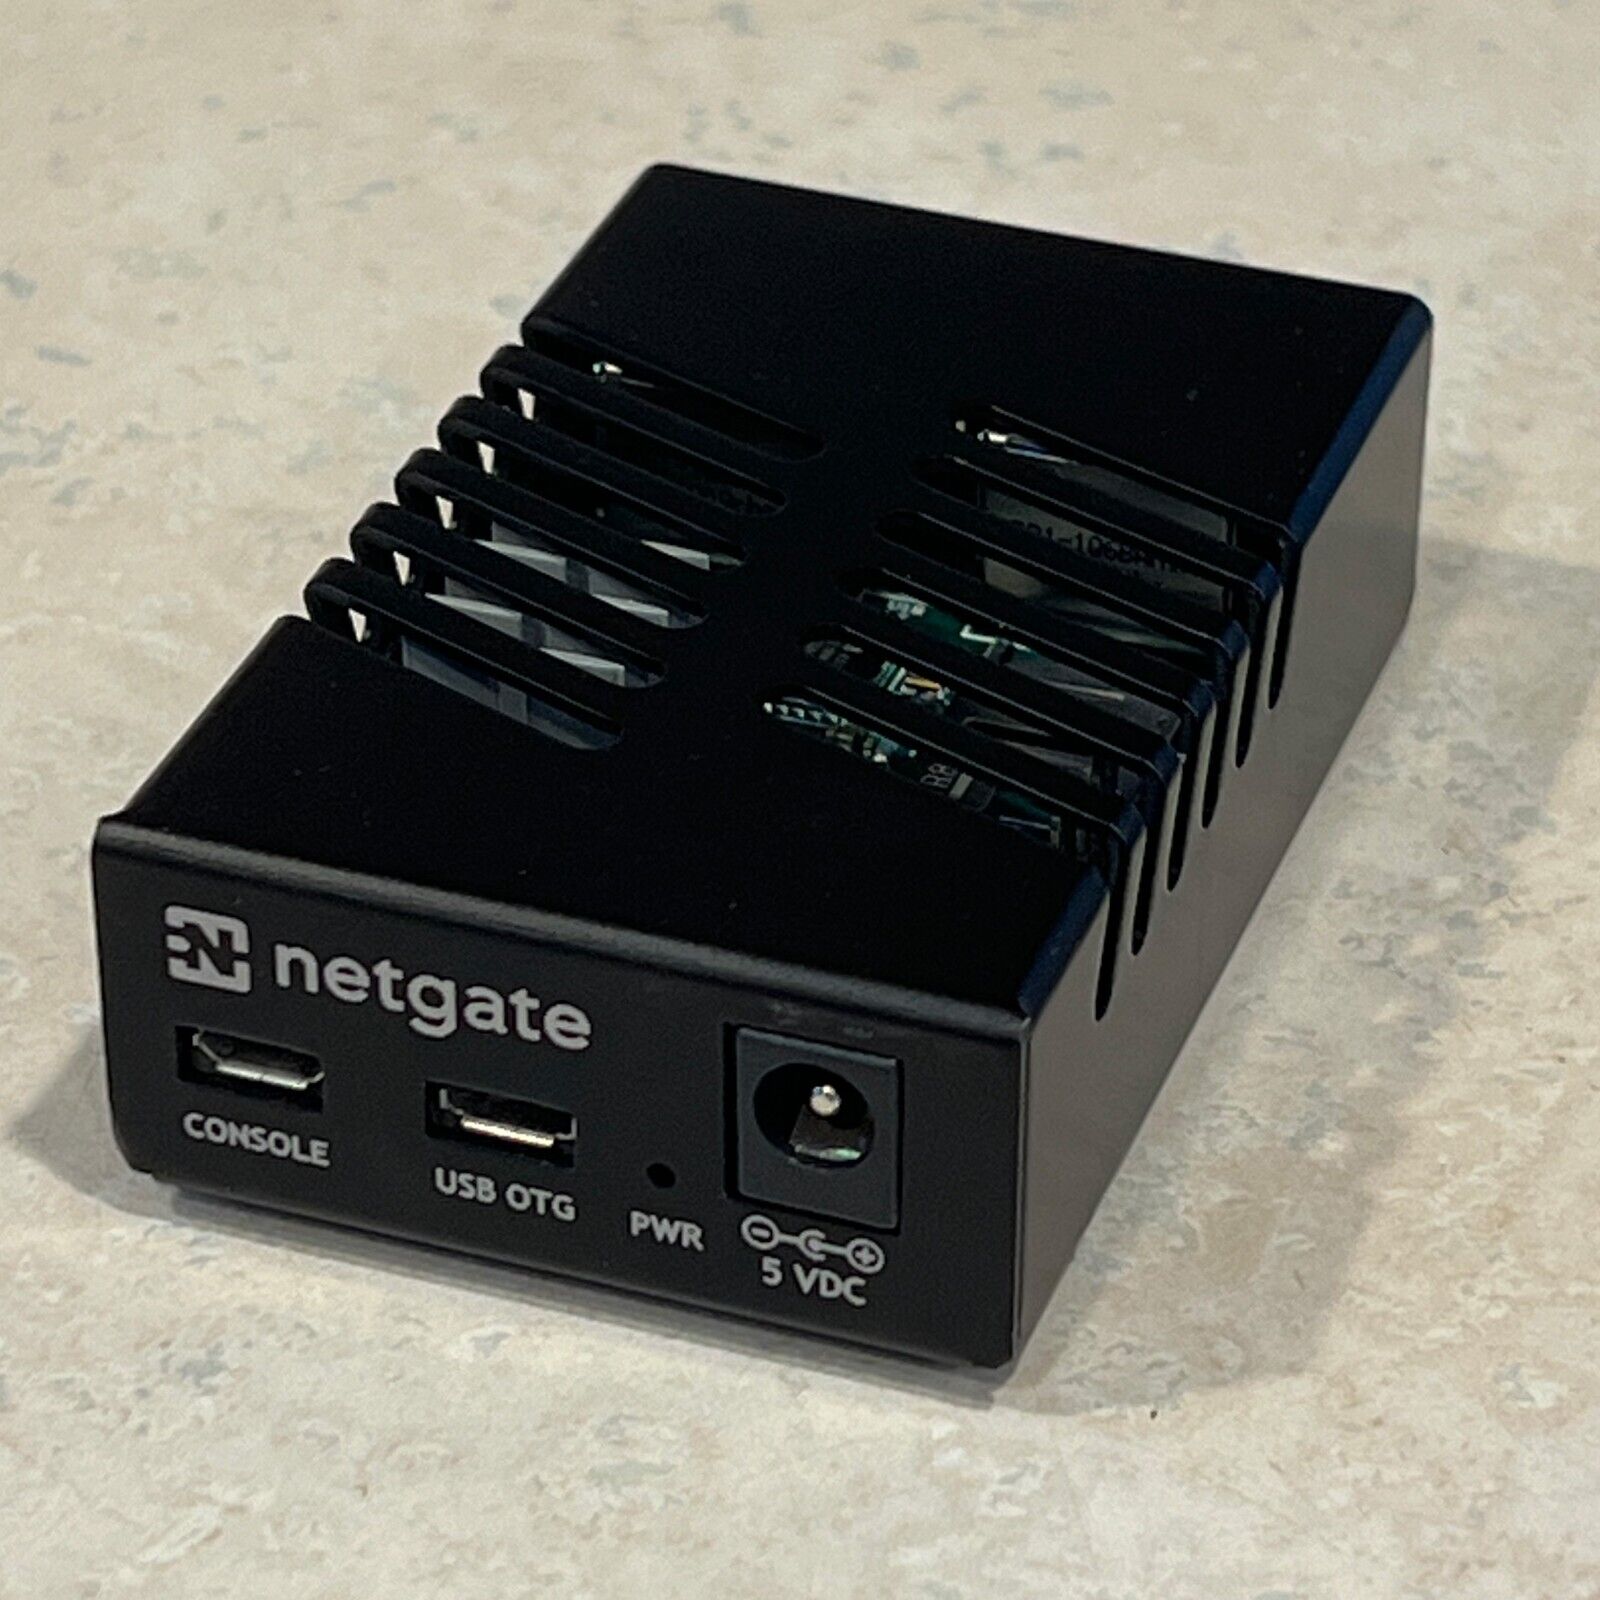 NETGATE SG-1000 pfSense FIREWALL SECURITY GATEWAY W / AC Adapter & Console Cable